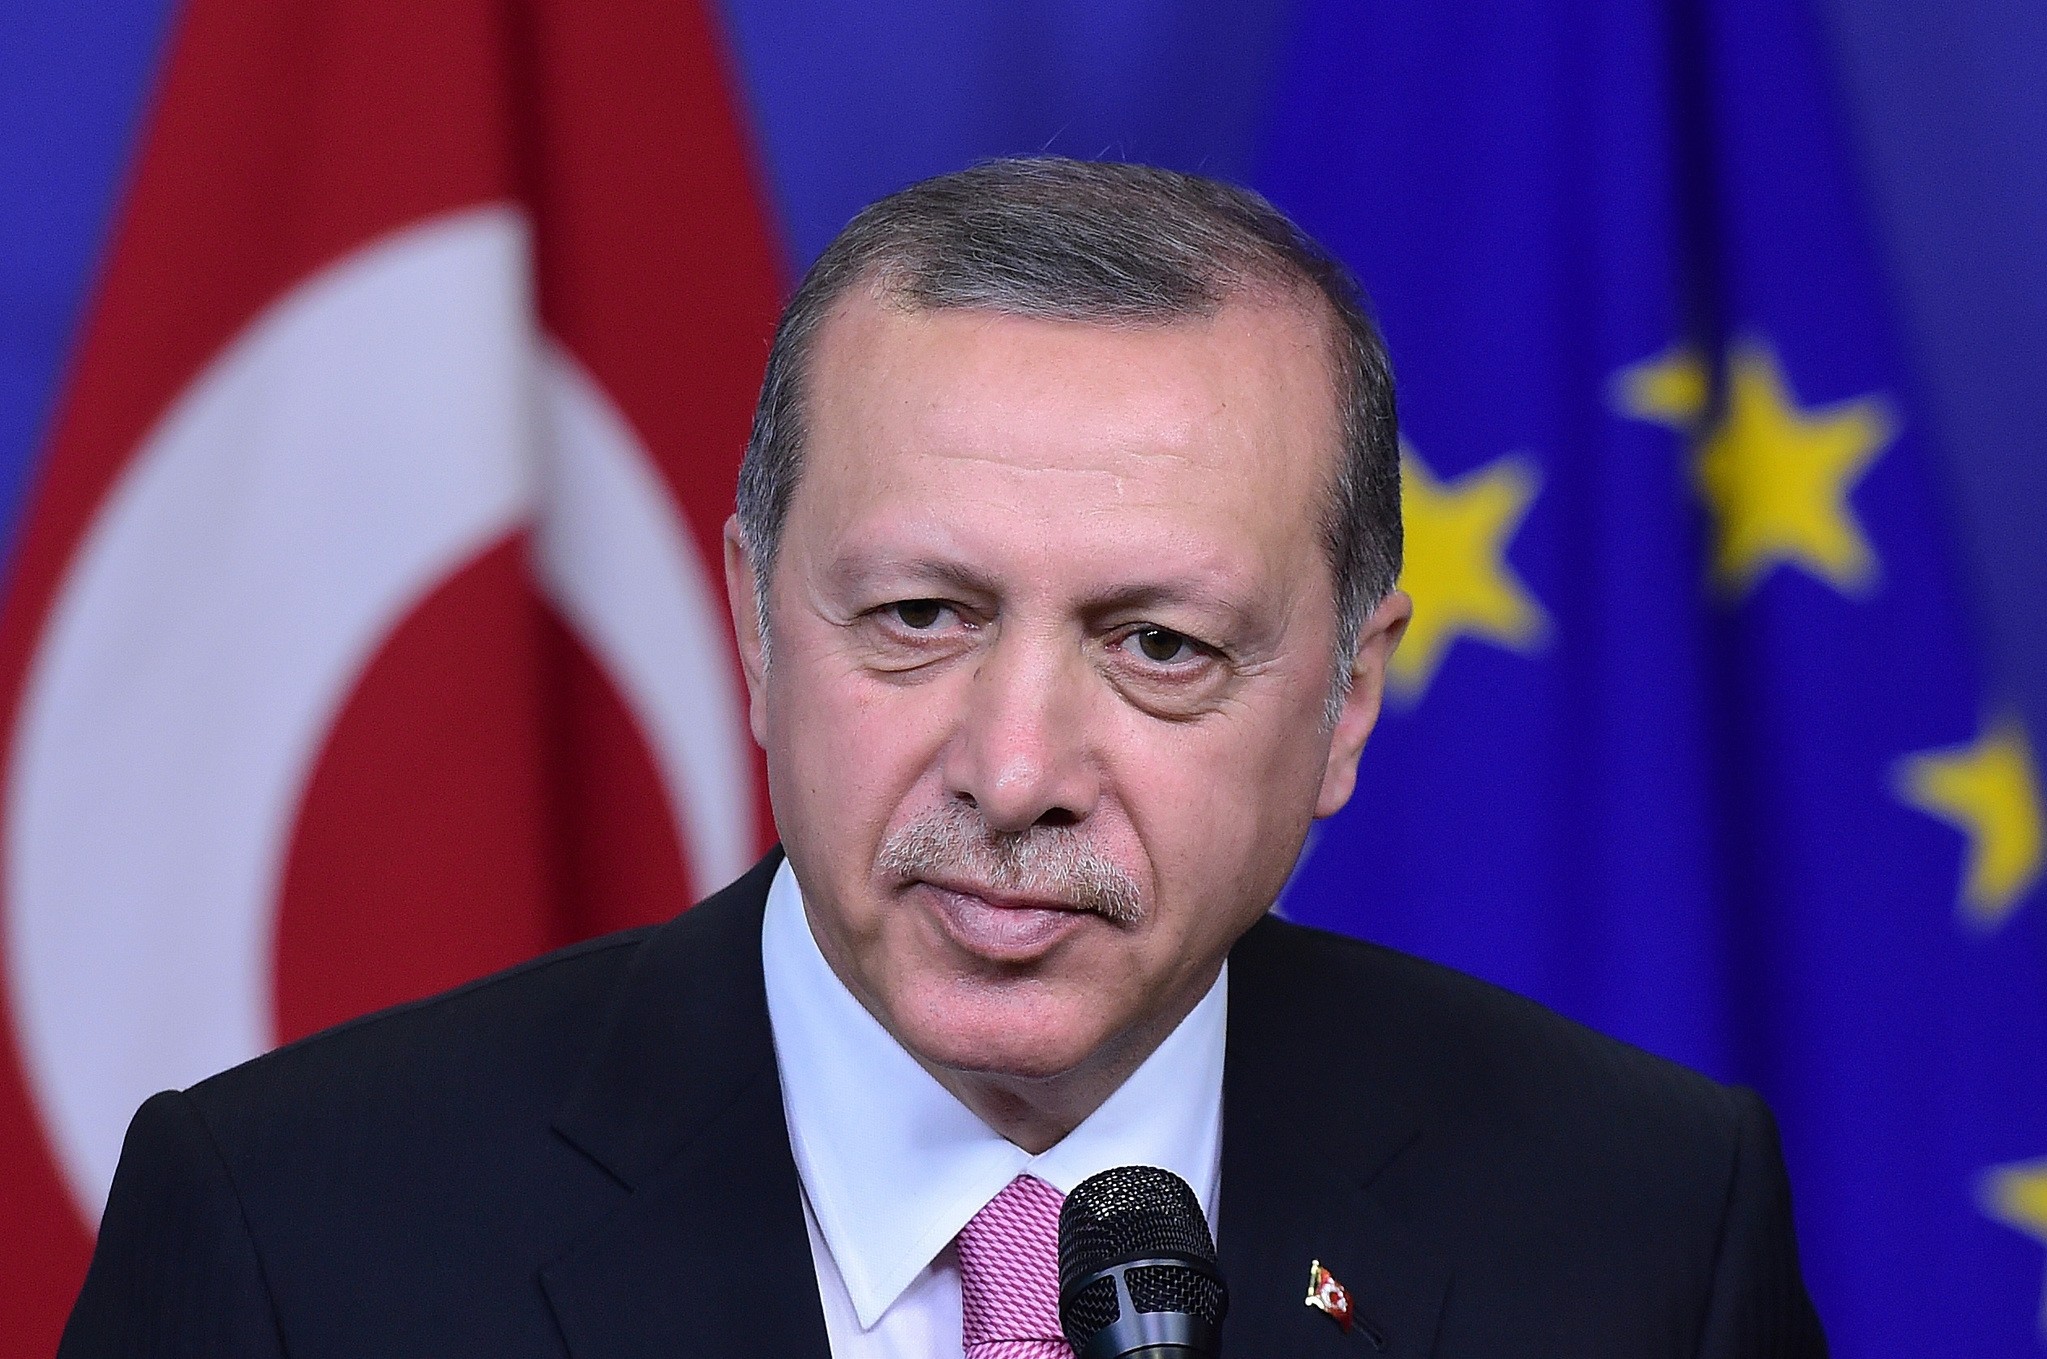 This file photo taken on October 05, 2015 shows President Recep Tayyip Erdou011fan addressing a brief statement as he arrives to meet with European Commission President Jean-Claude Juncker in Brussels, on October 5, 2015 (AFP Photo)